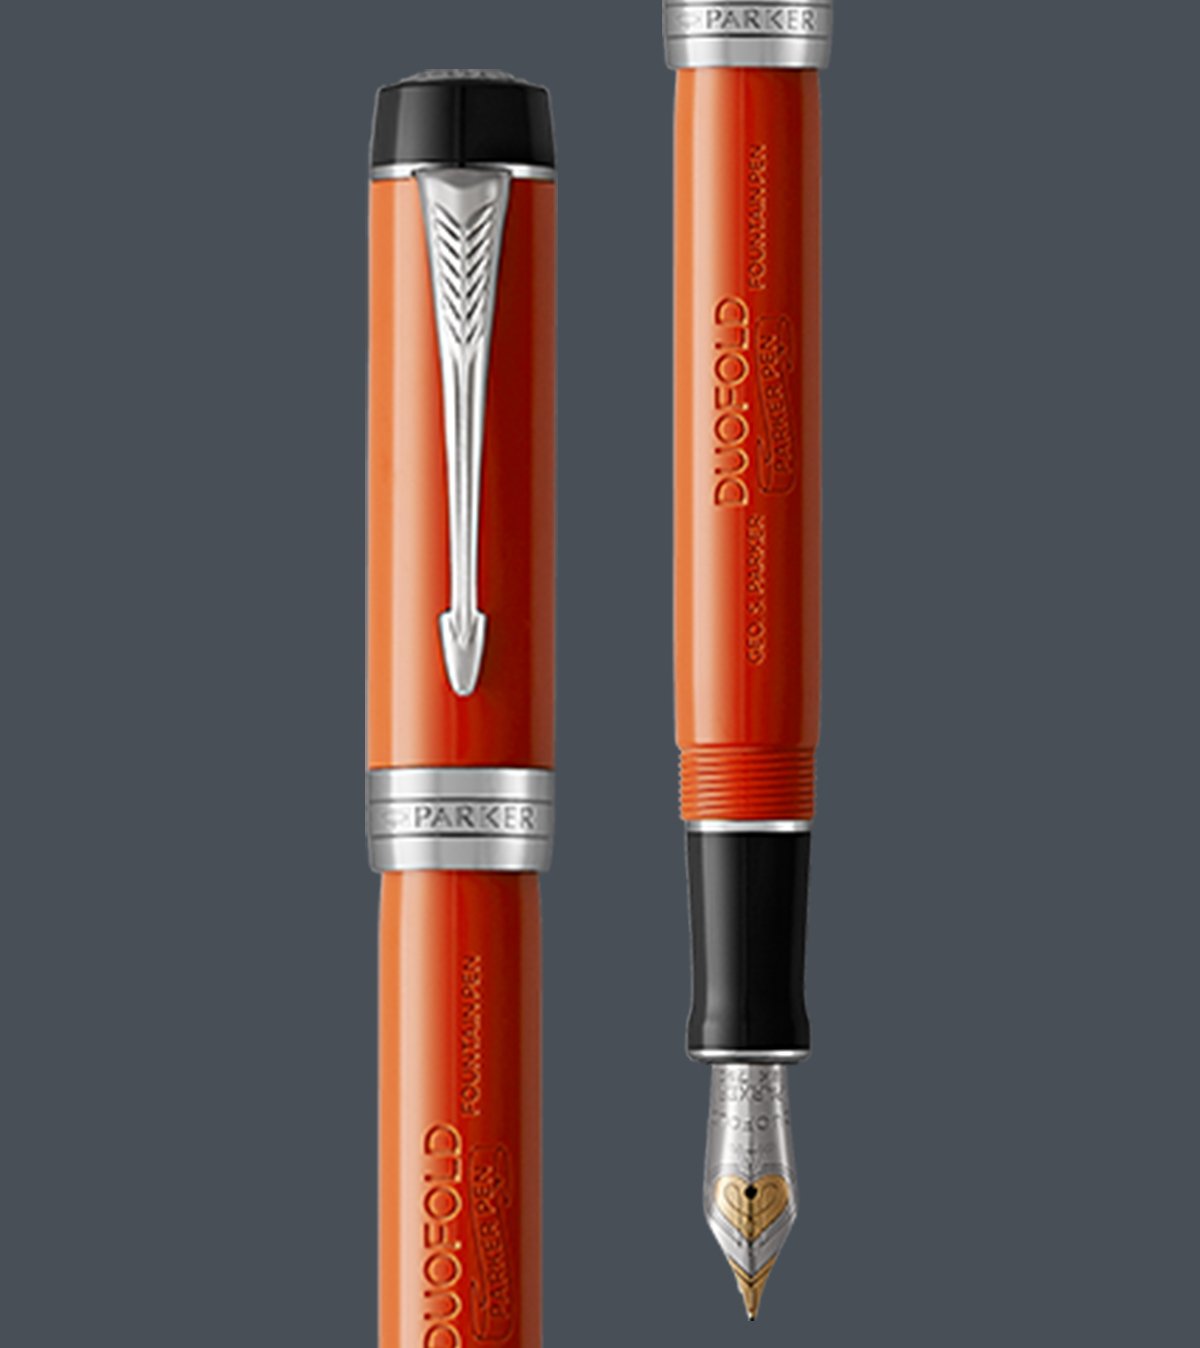 Two upright Duofold fountain pens with chrome trim.